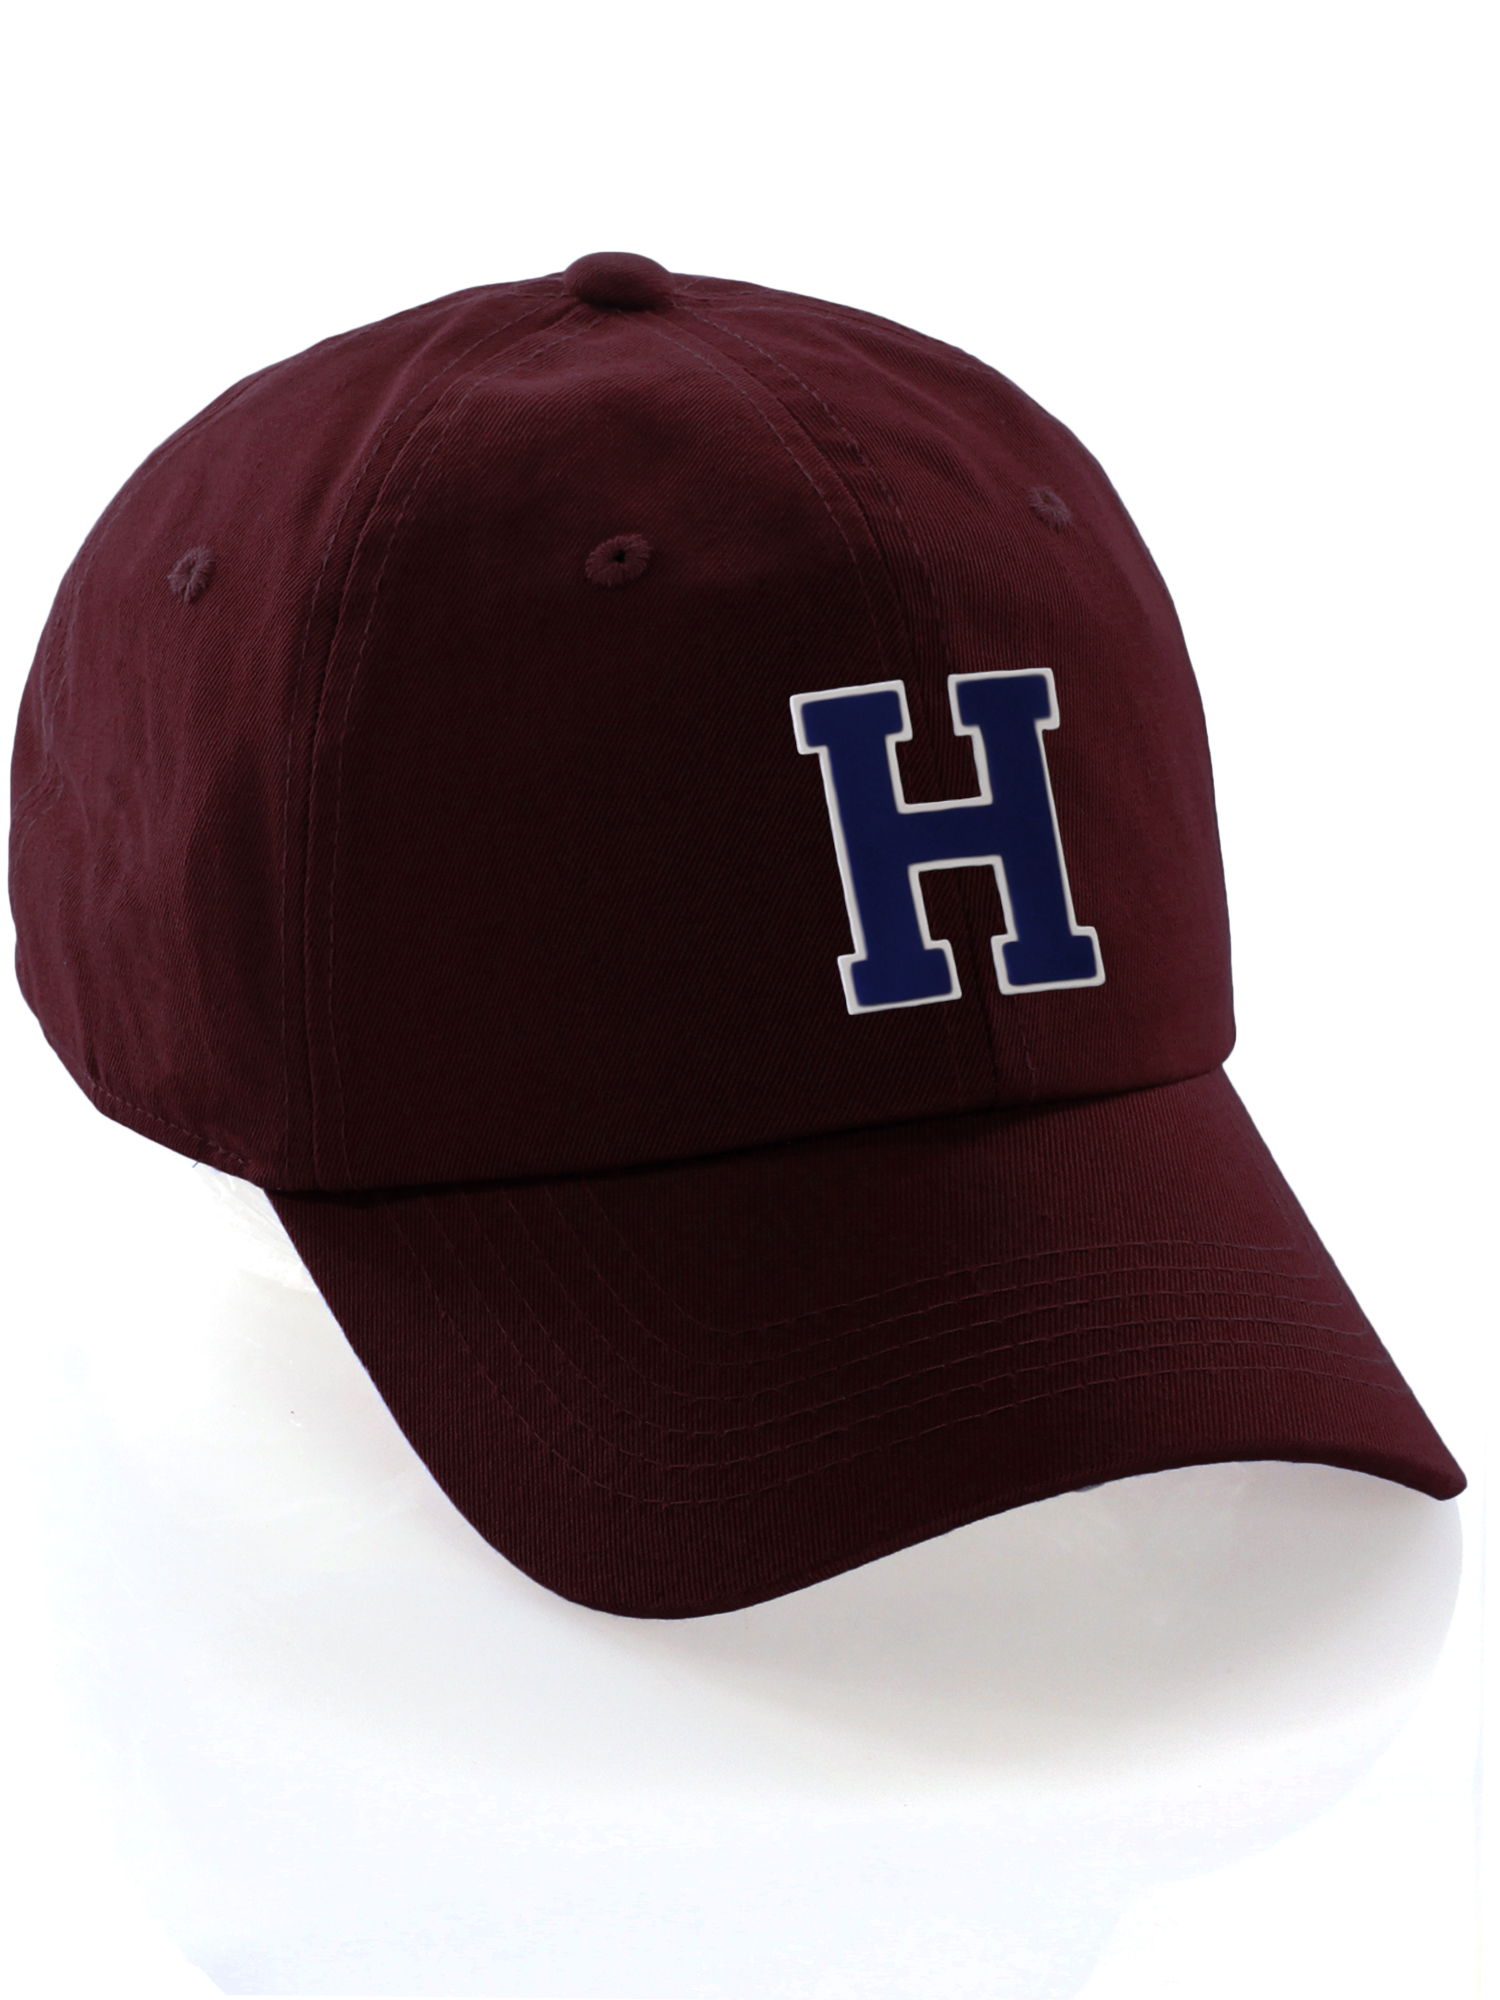 Custom Hat A to Z Initial Letters Classic Baseball Cap, Burgundy Hat White Navy Letter H - image 1 of 4